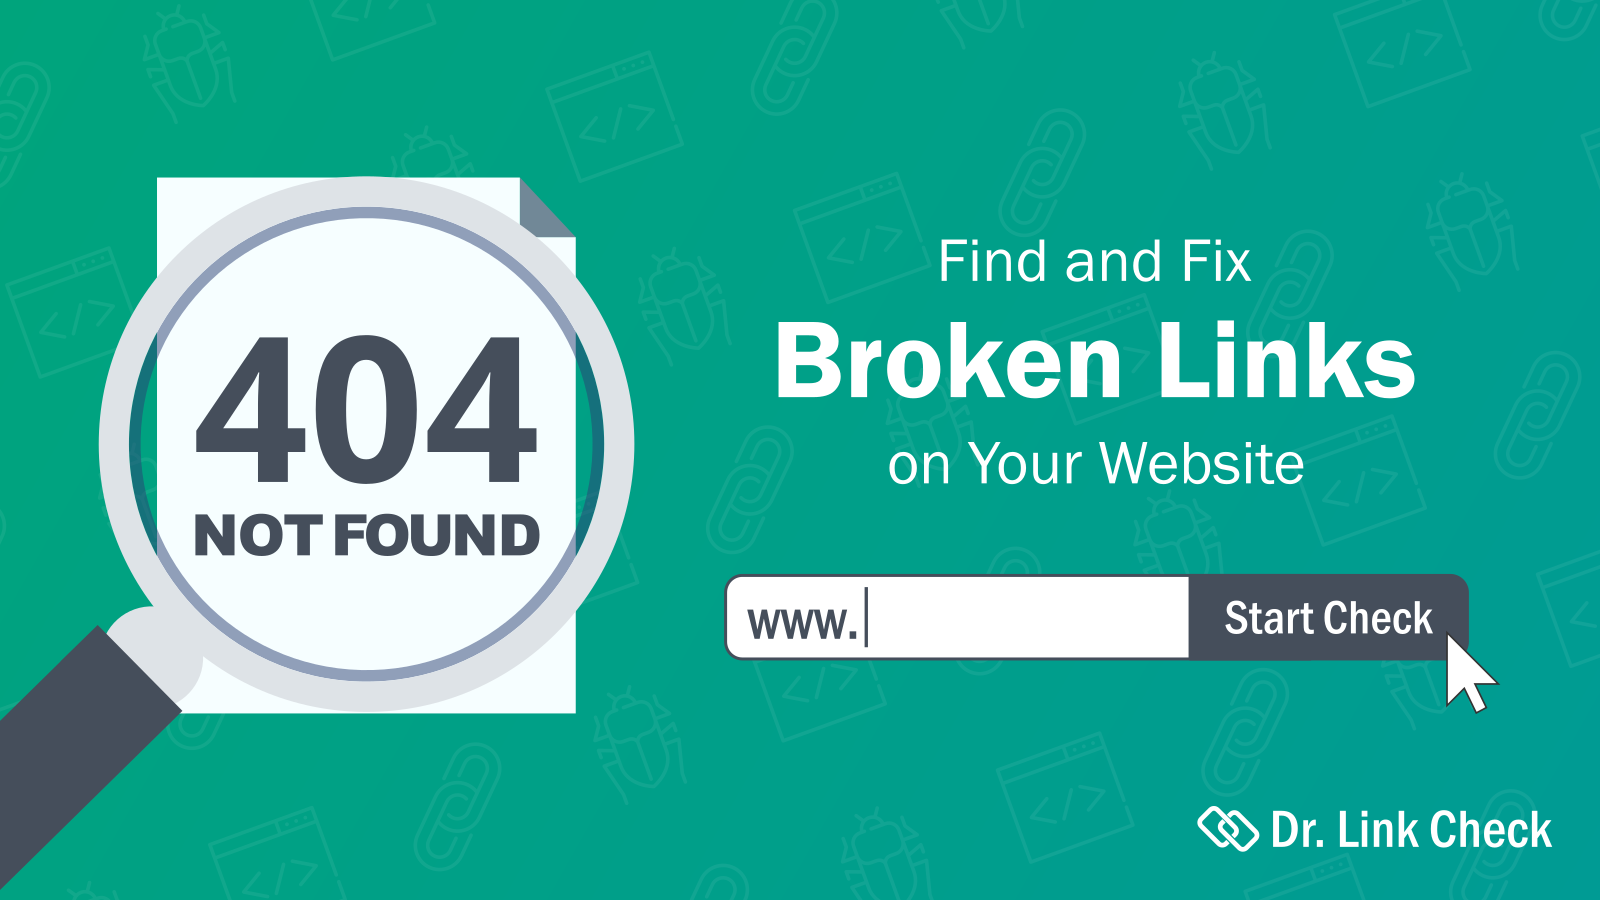 Find and Fix Broken Links on Your Website With Dr. Link Check